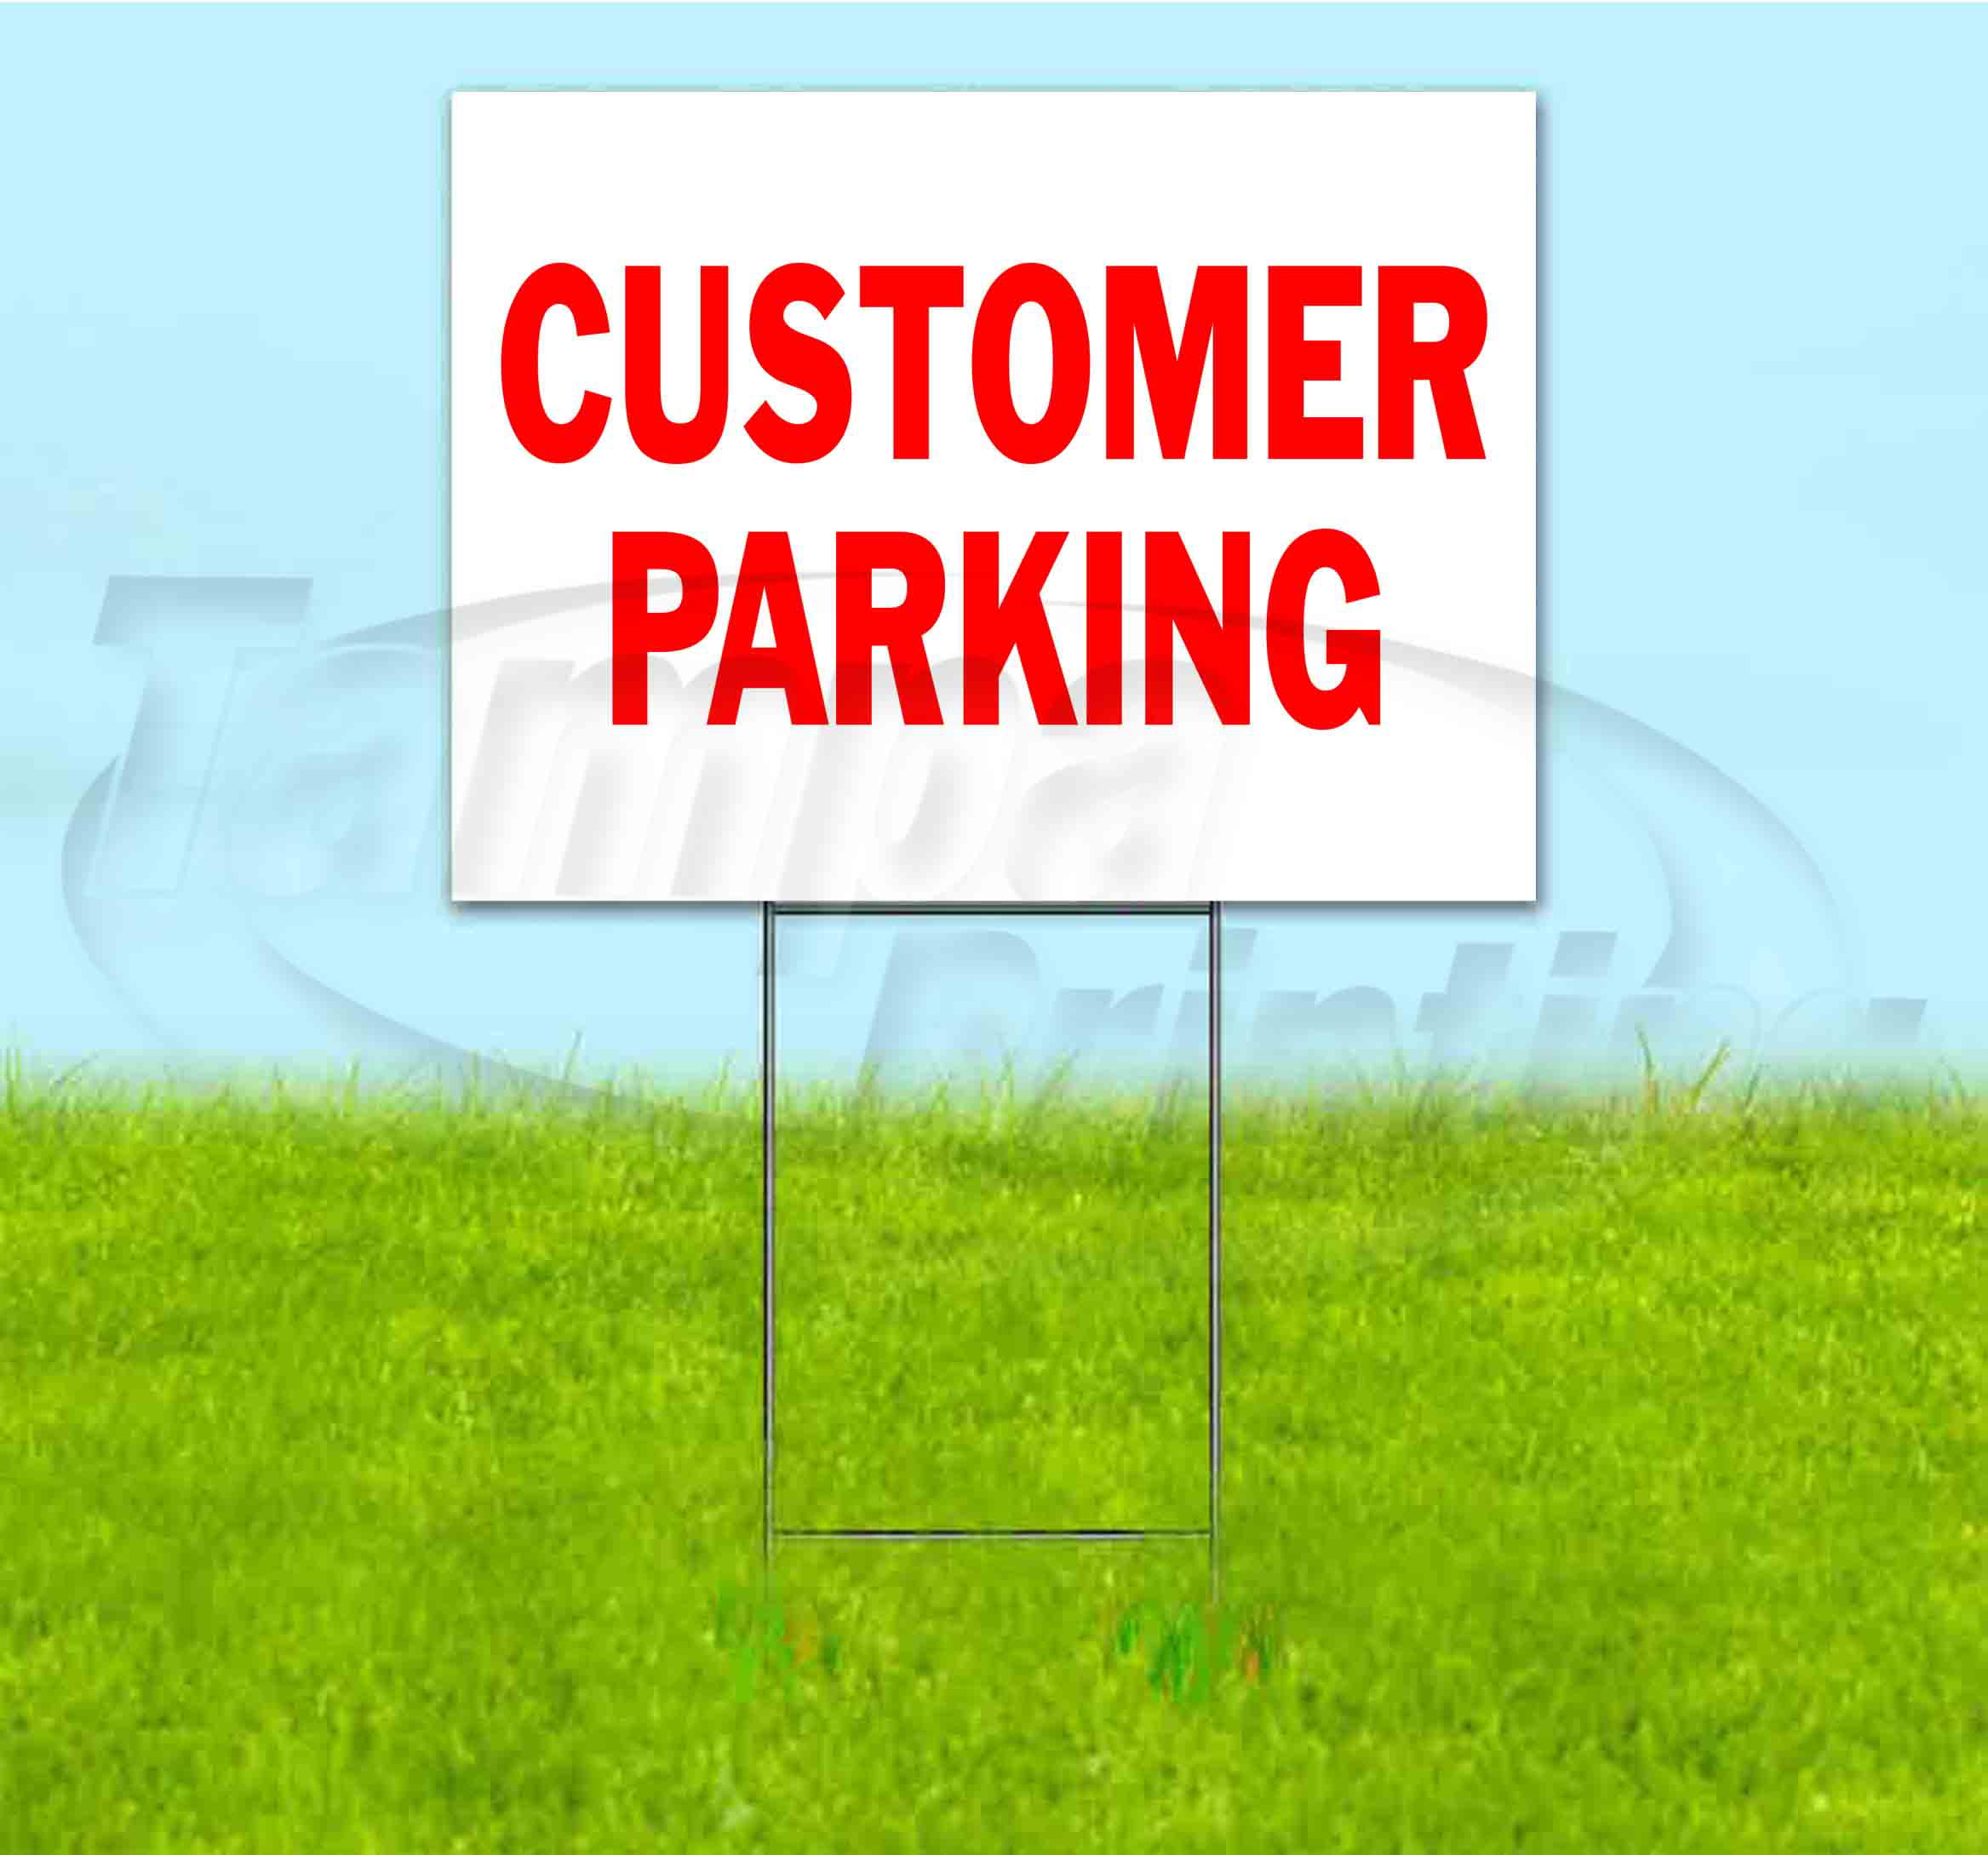 NOW LEASING 18x24 Yard Sign Corrugated Plastic Bandit Lawn USA 